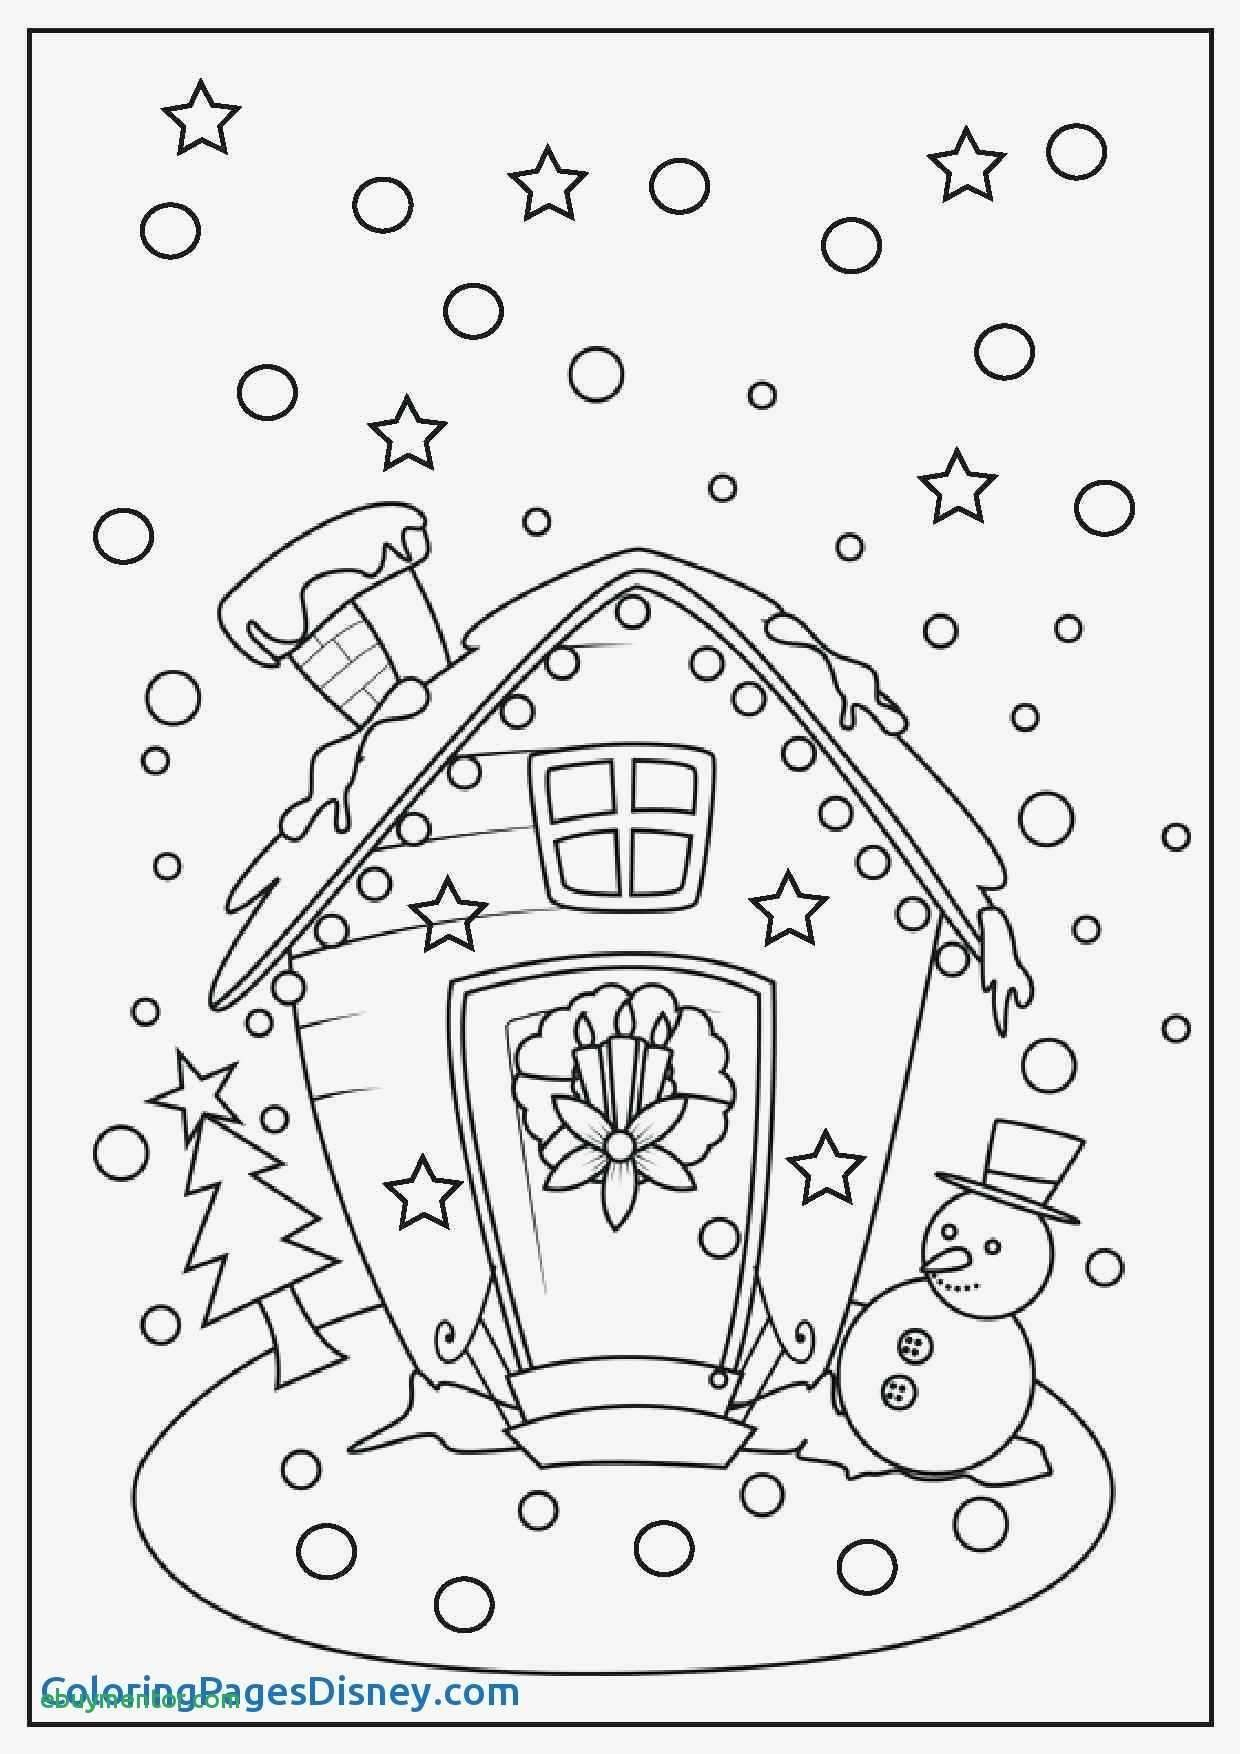 Christmas Room Colouring Card. Nativity Scene Christmas Tree Cards - Free Printable Christmas Cards To Color